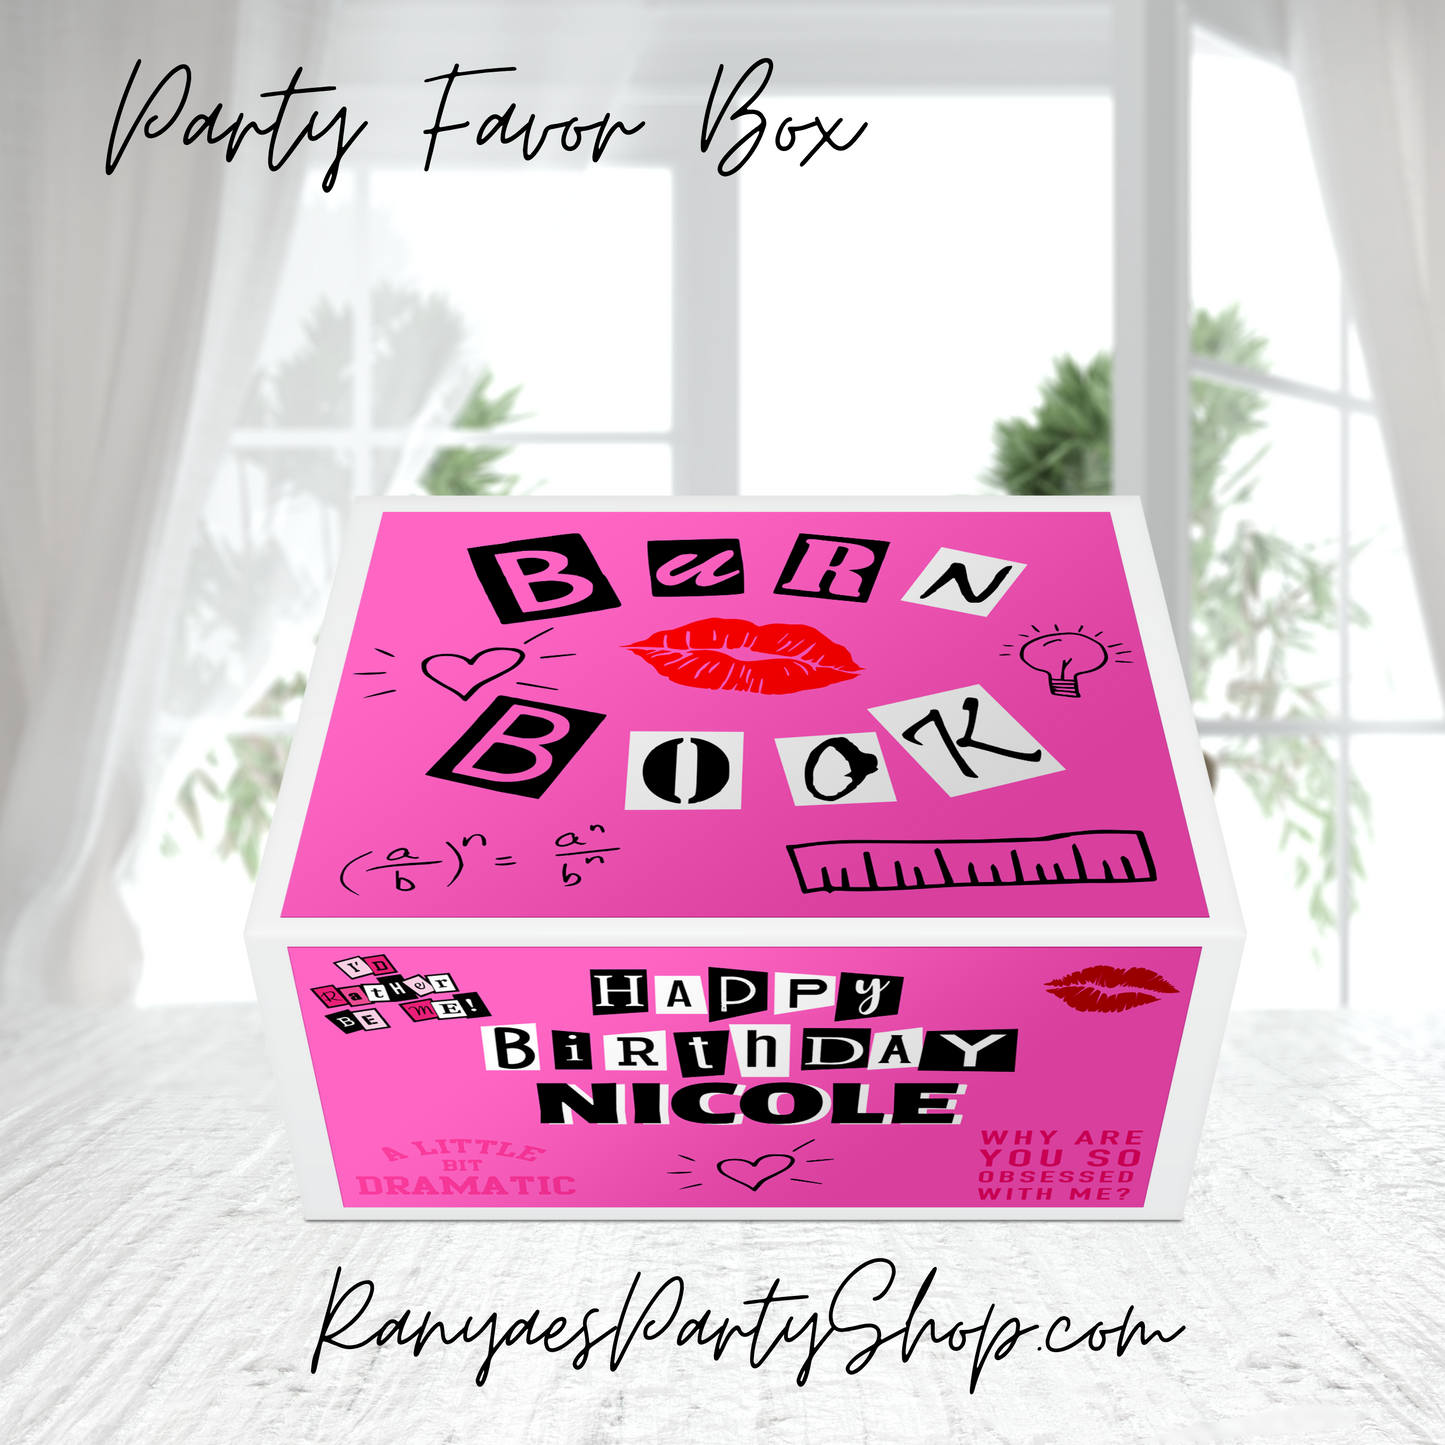 Mean Girls Party Box | Mean Girls Party | Shipped | Kids Party Box  |